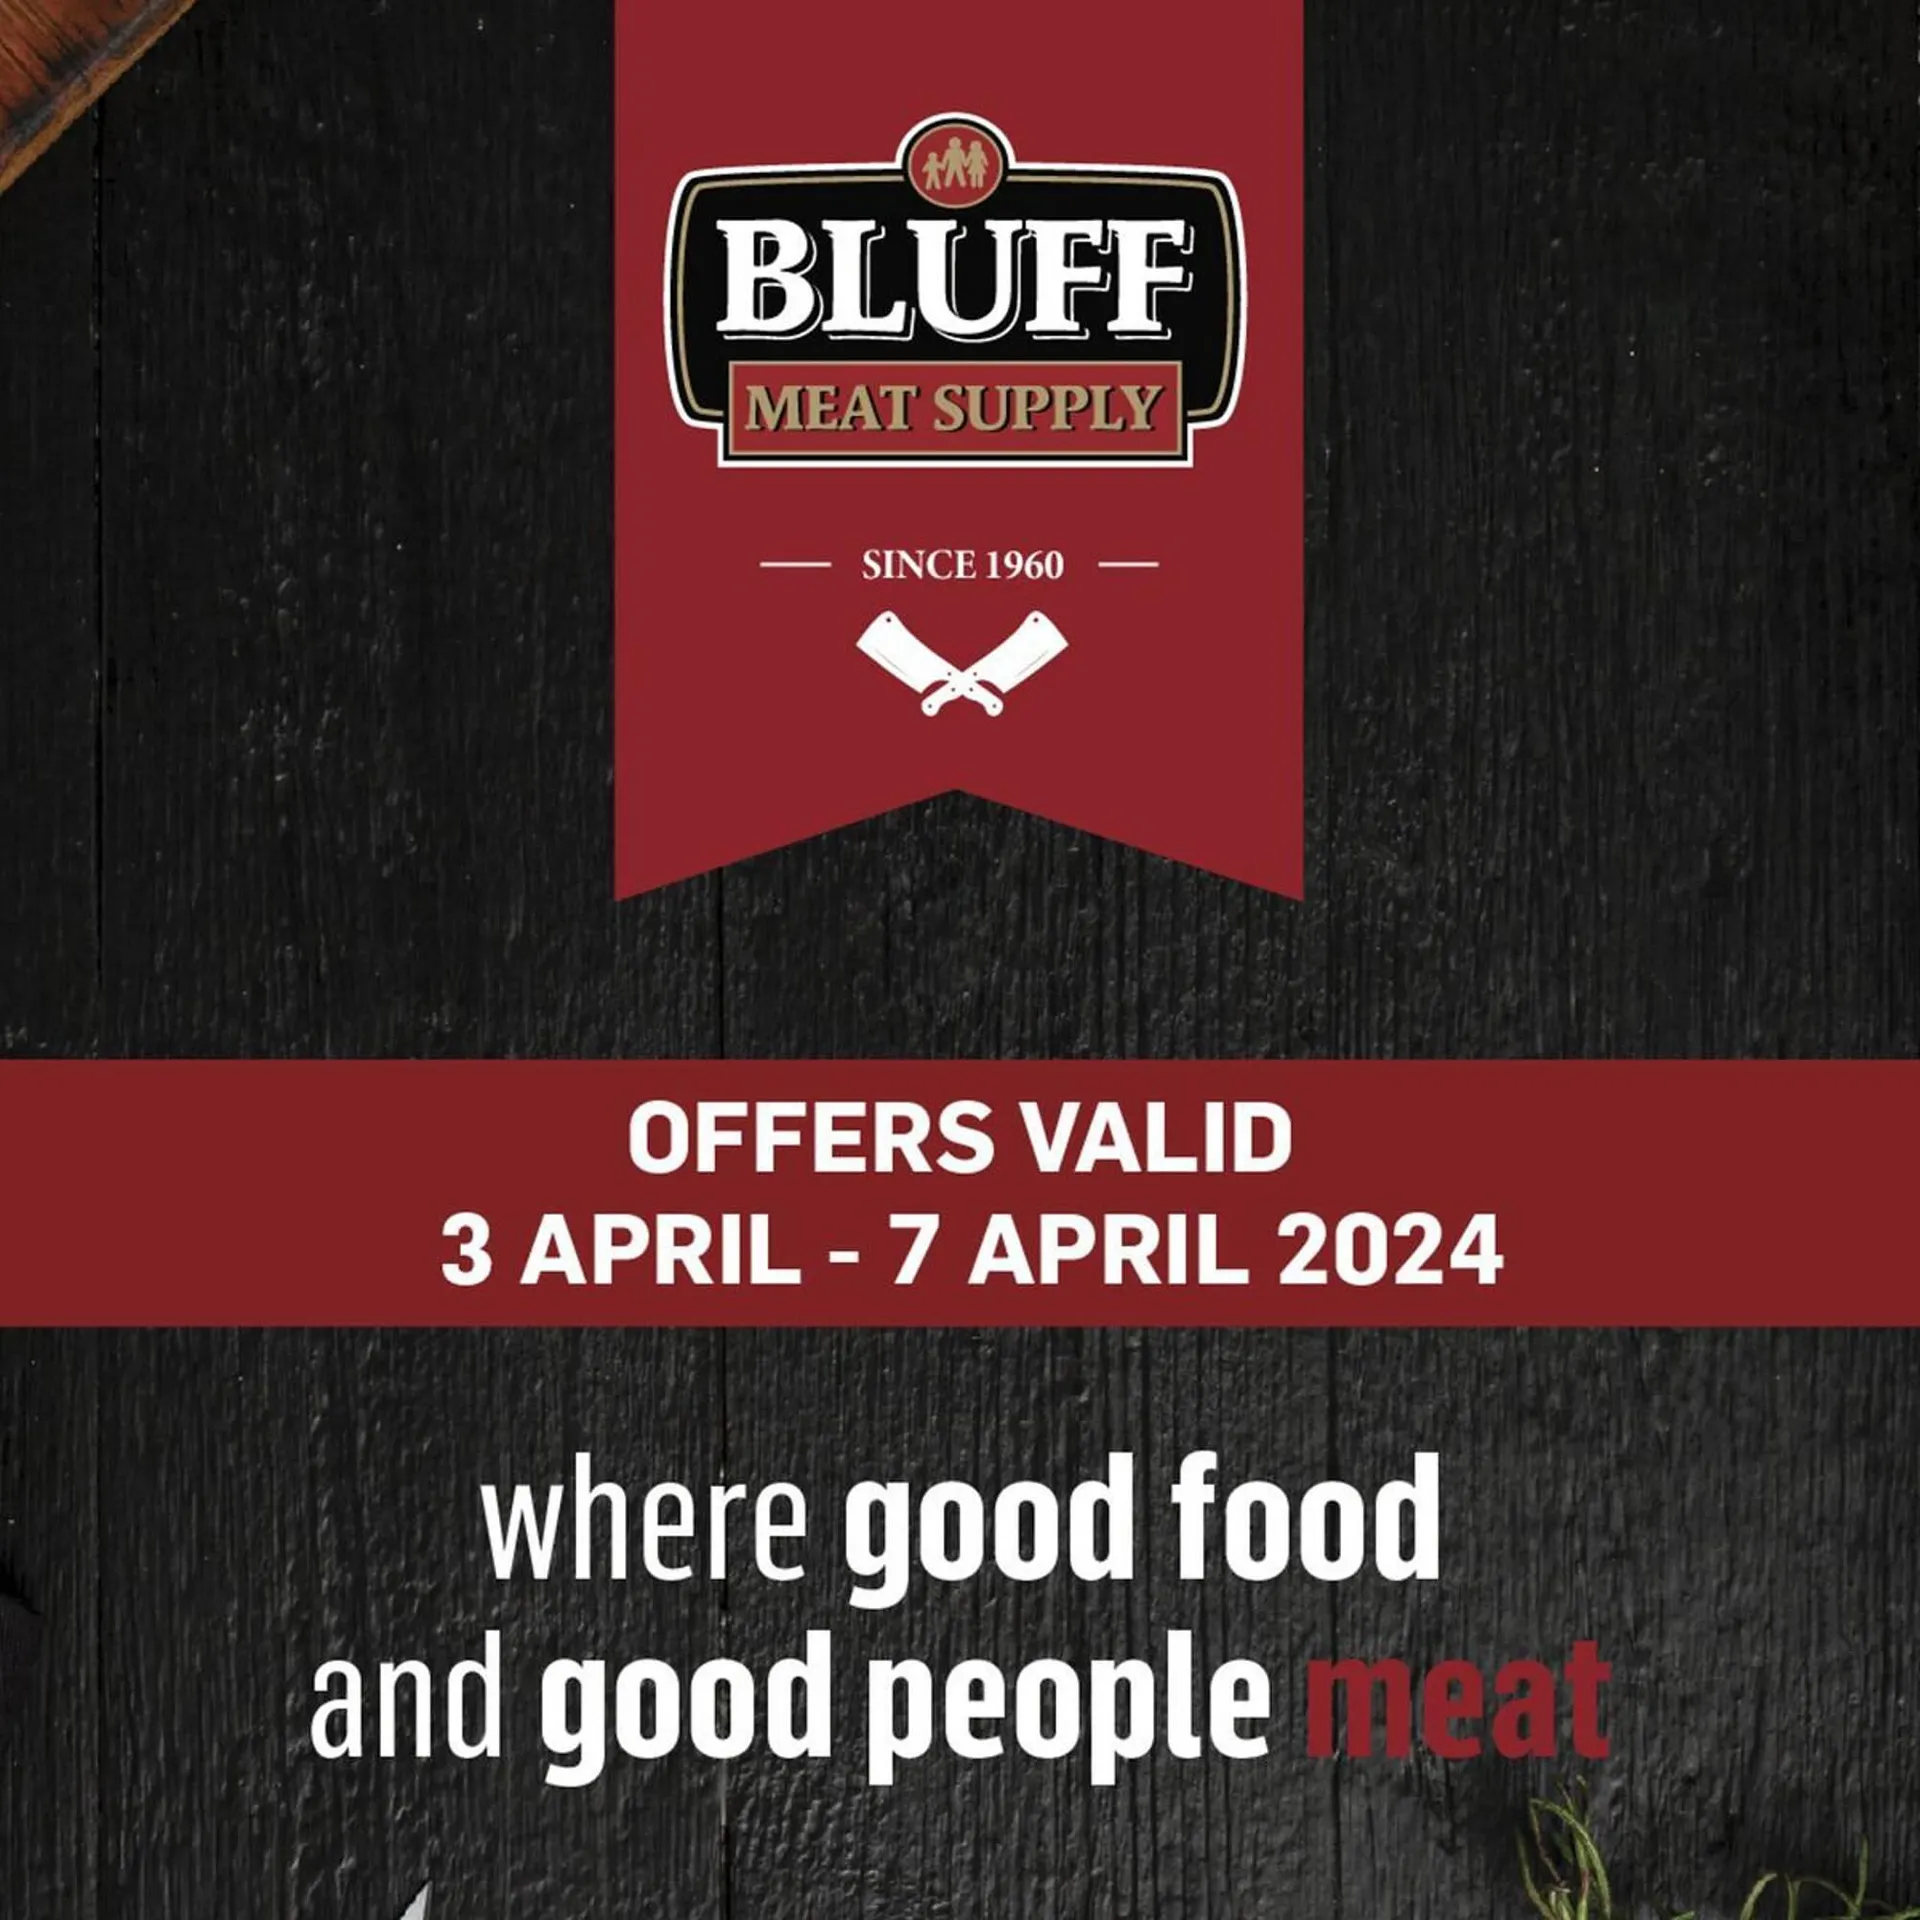 Bluff Meat Supply catalogue - 3 April 7 April 2024 - Page 1